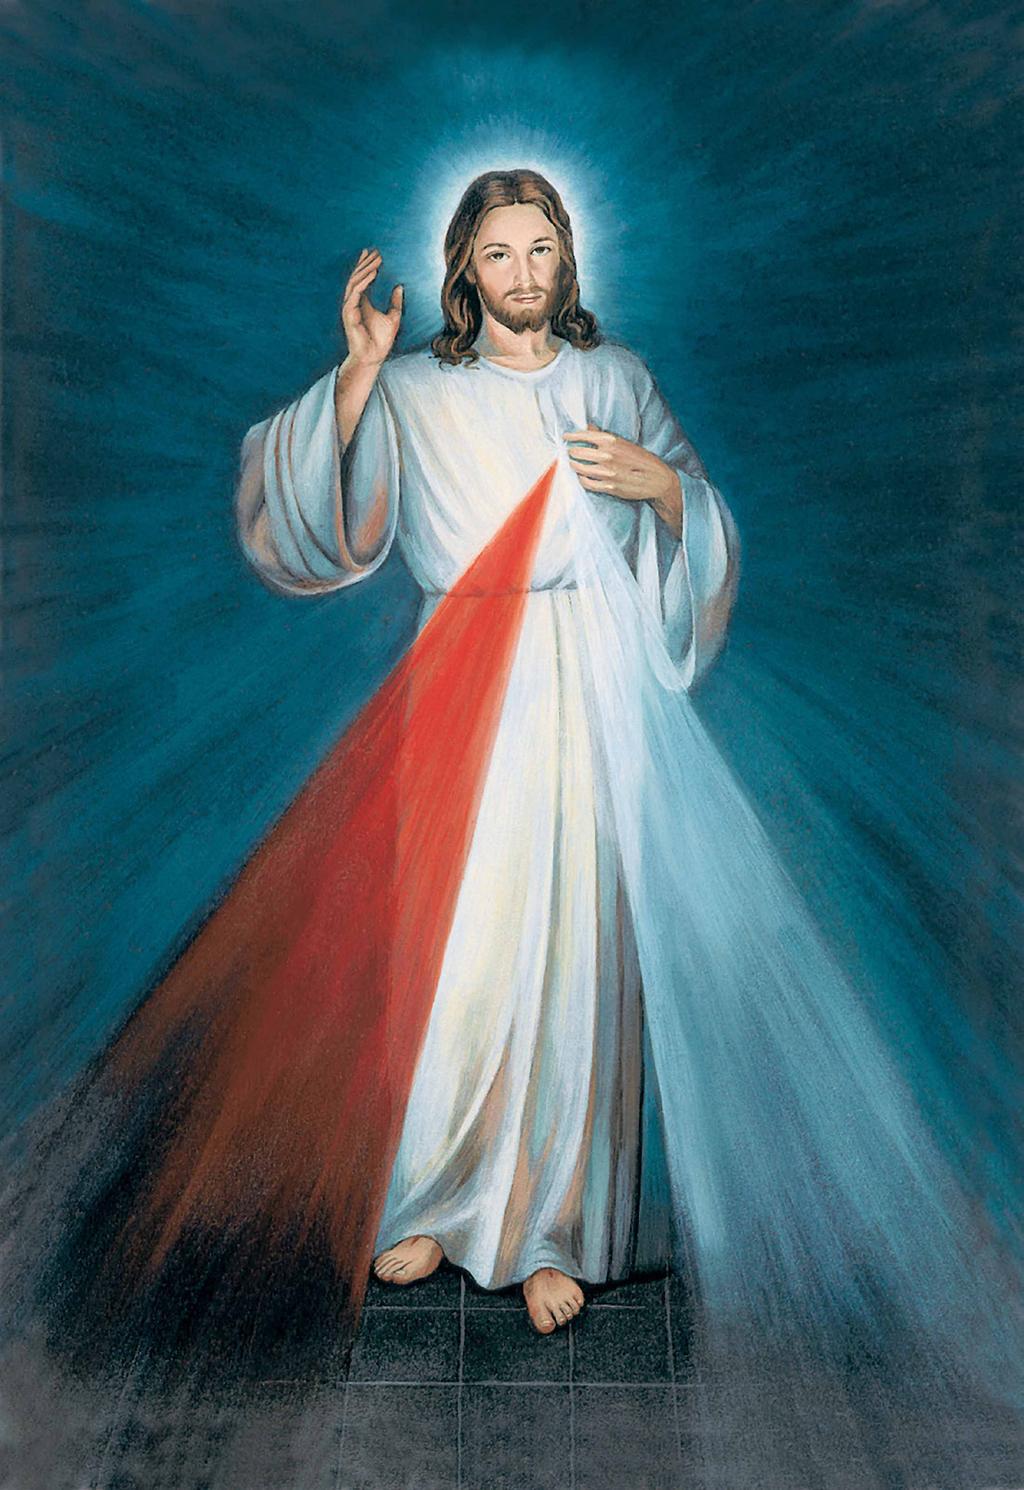 Prayer for the Extraordinary Jubilee of Mercy Lord Jesus Christ, you have taught us to be merciful like the heavenly Father, and have told us that whoever sees you sees him.